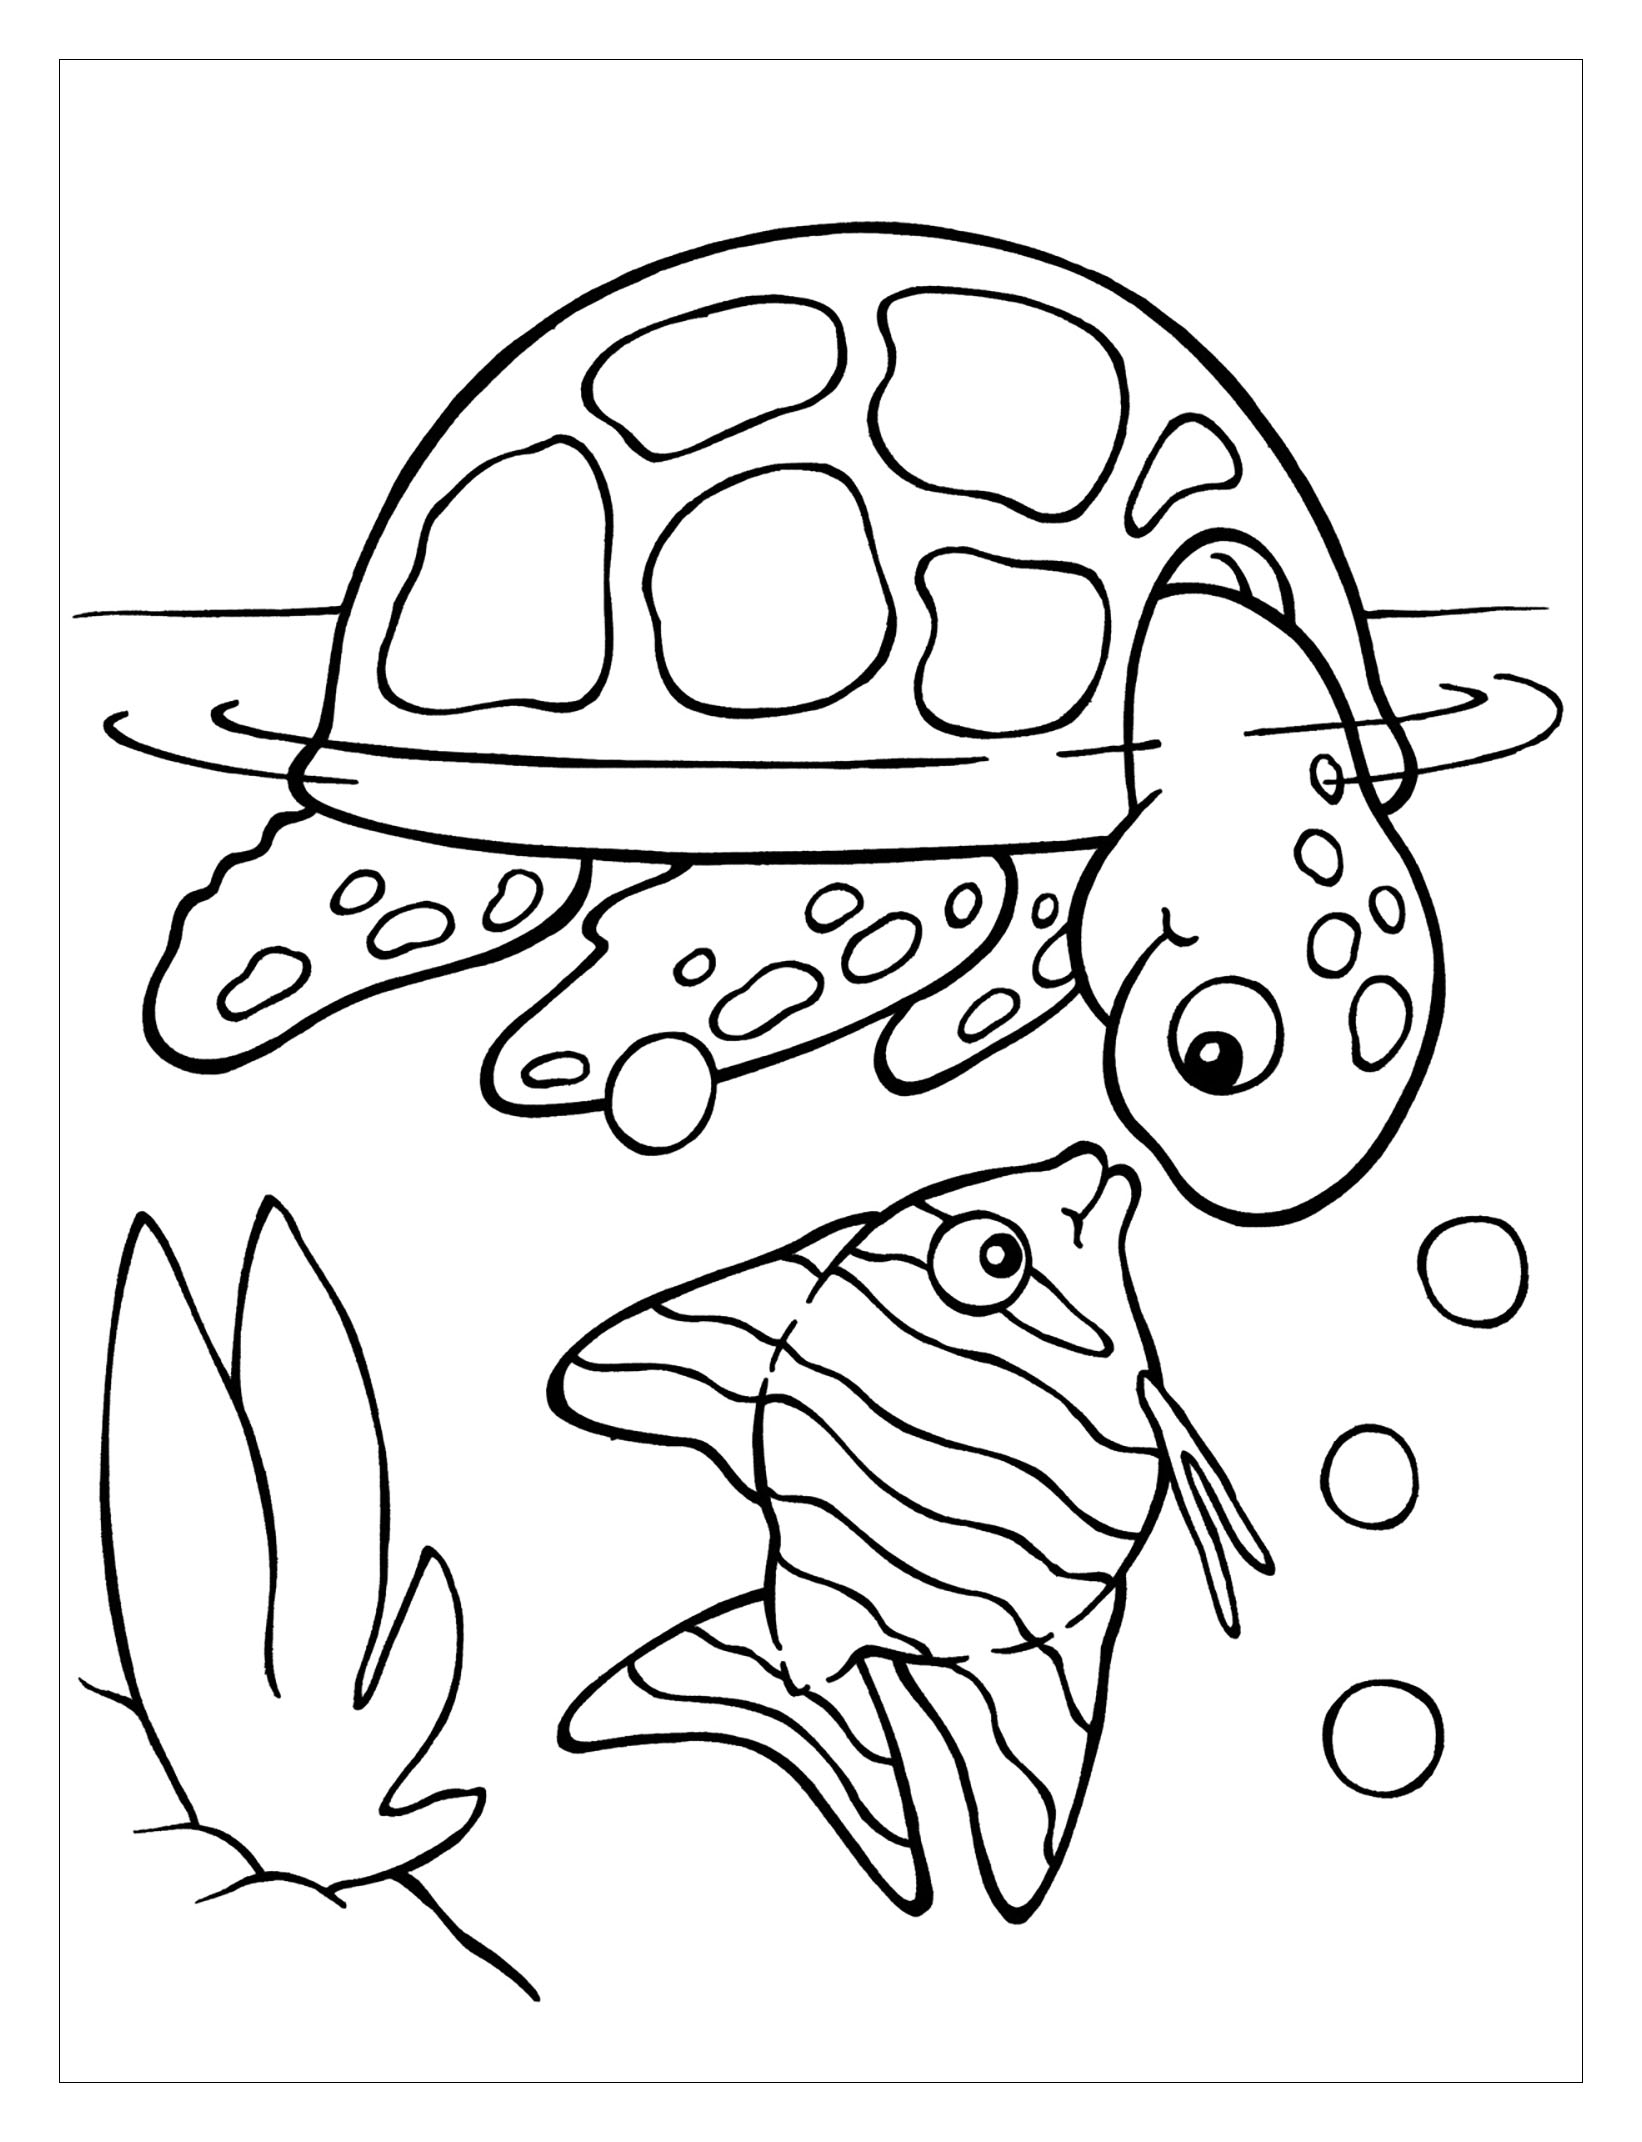 Download Turtles to color for kids - Turtles Kids Coloring Pages